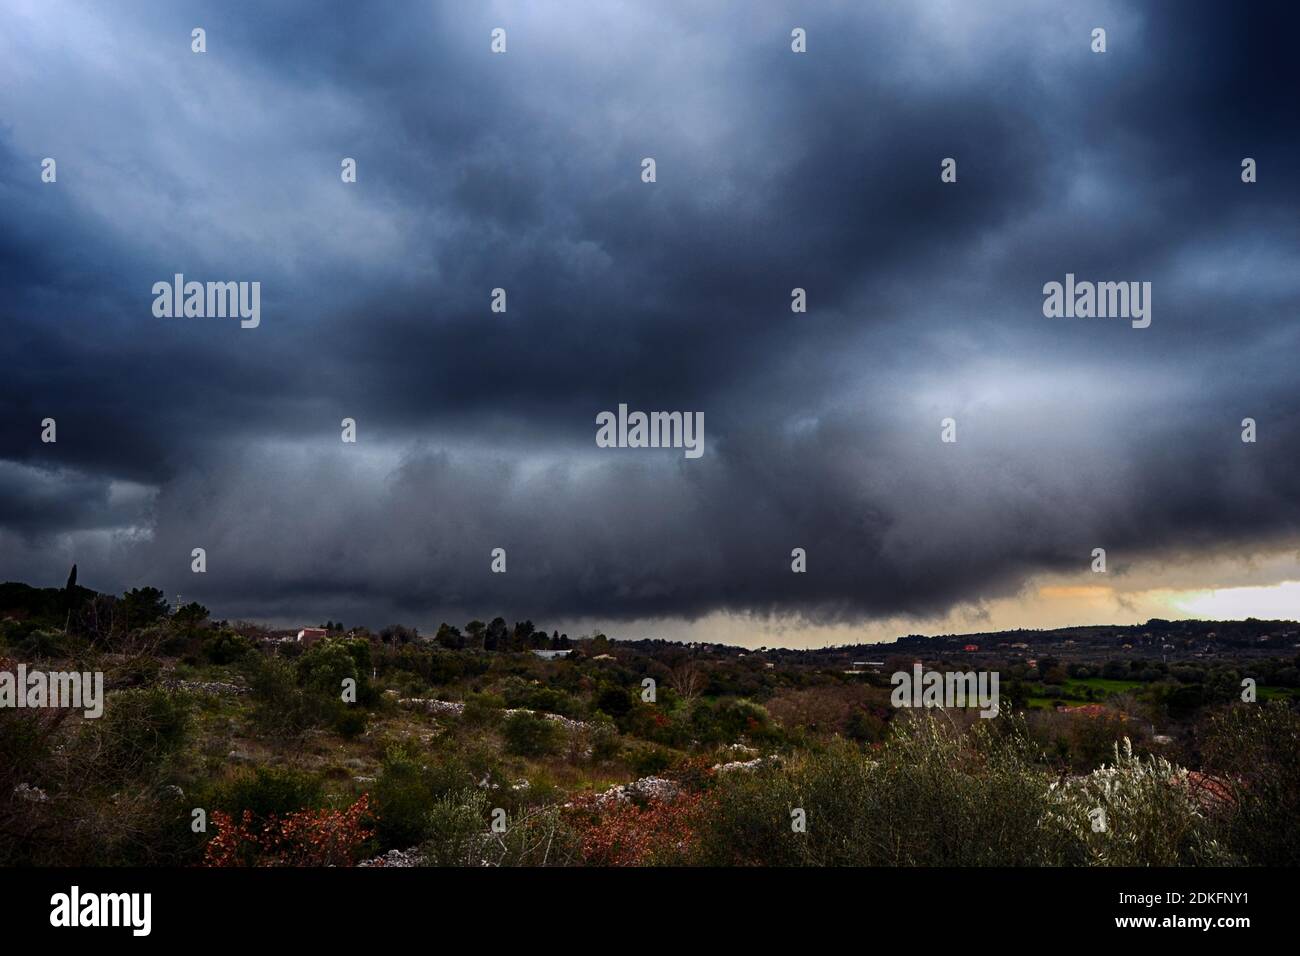 Light in the dark and dramatic storm clouds background. Storm clouds. Supercell Storm Cumulonimbus Stock Photo